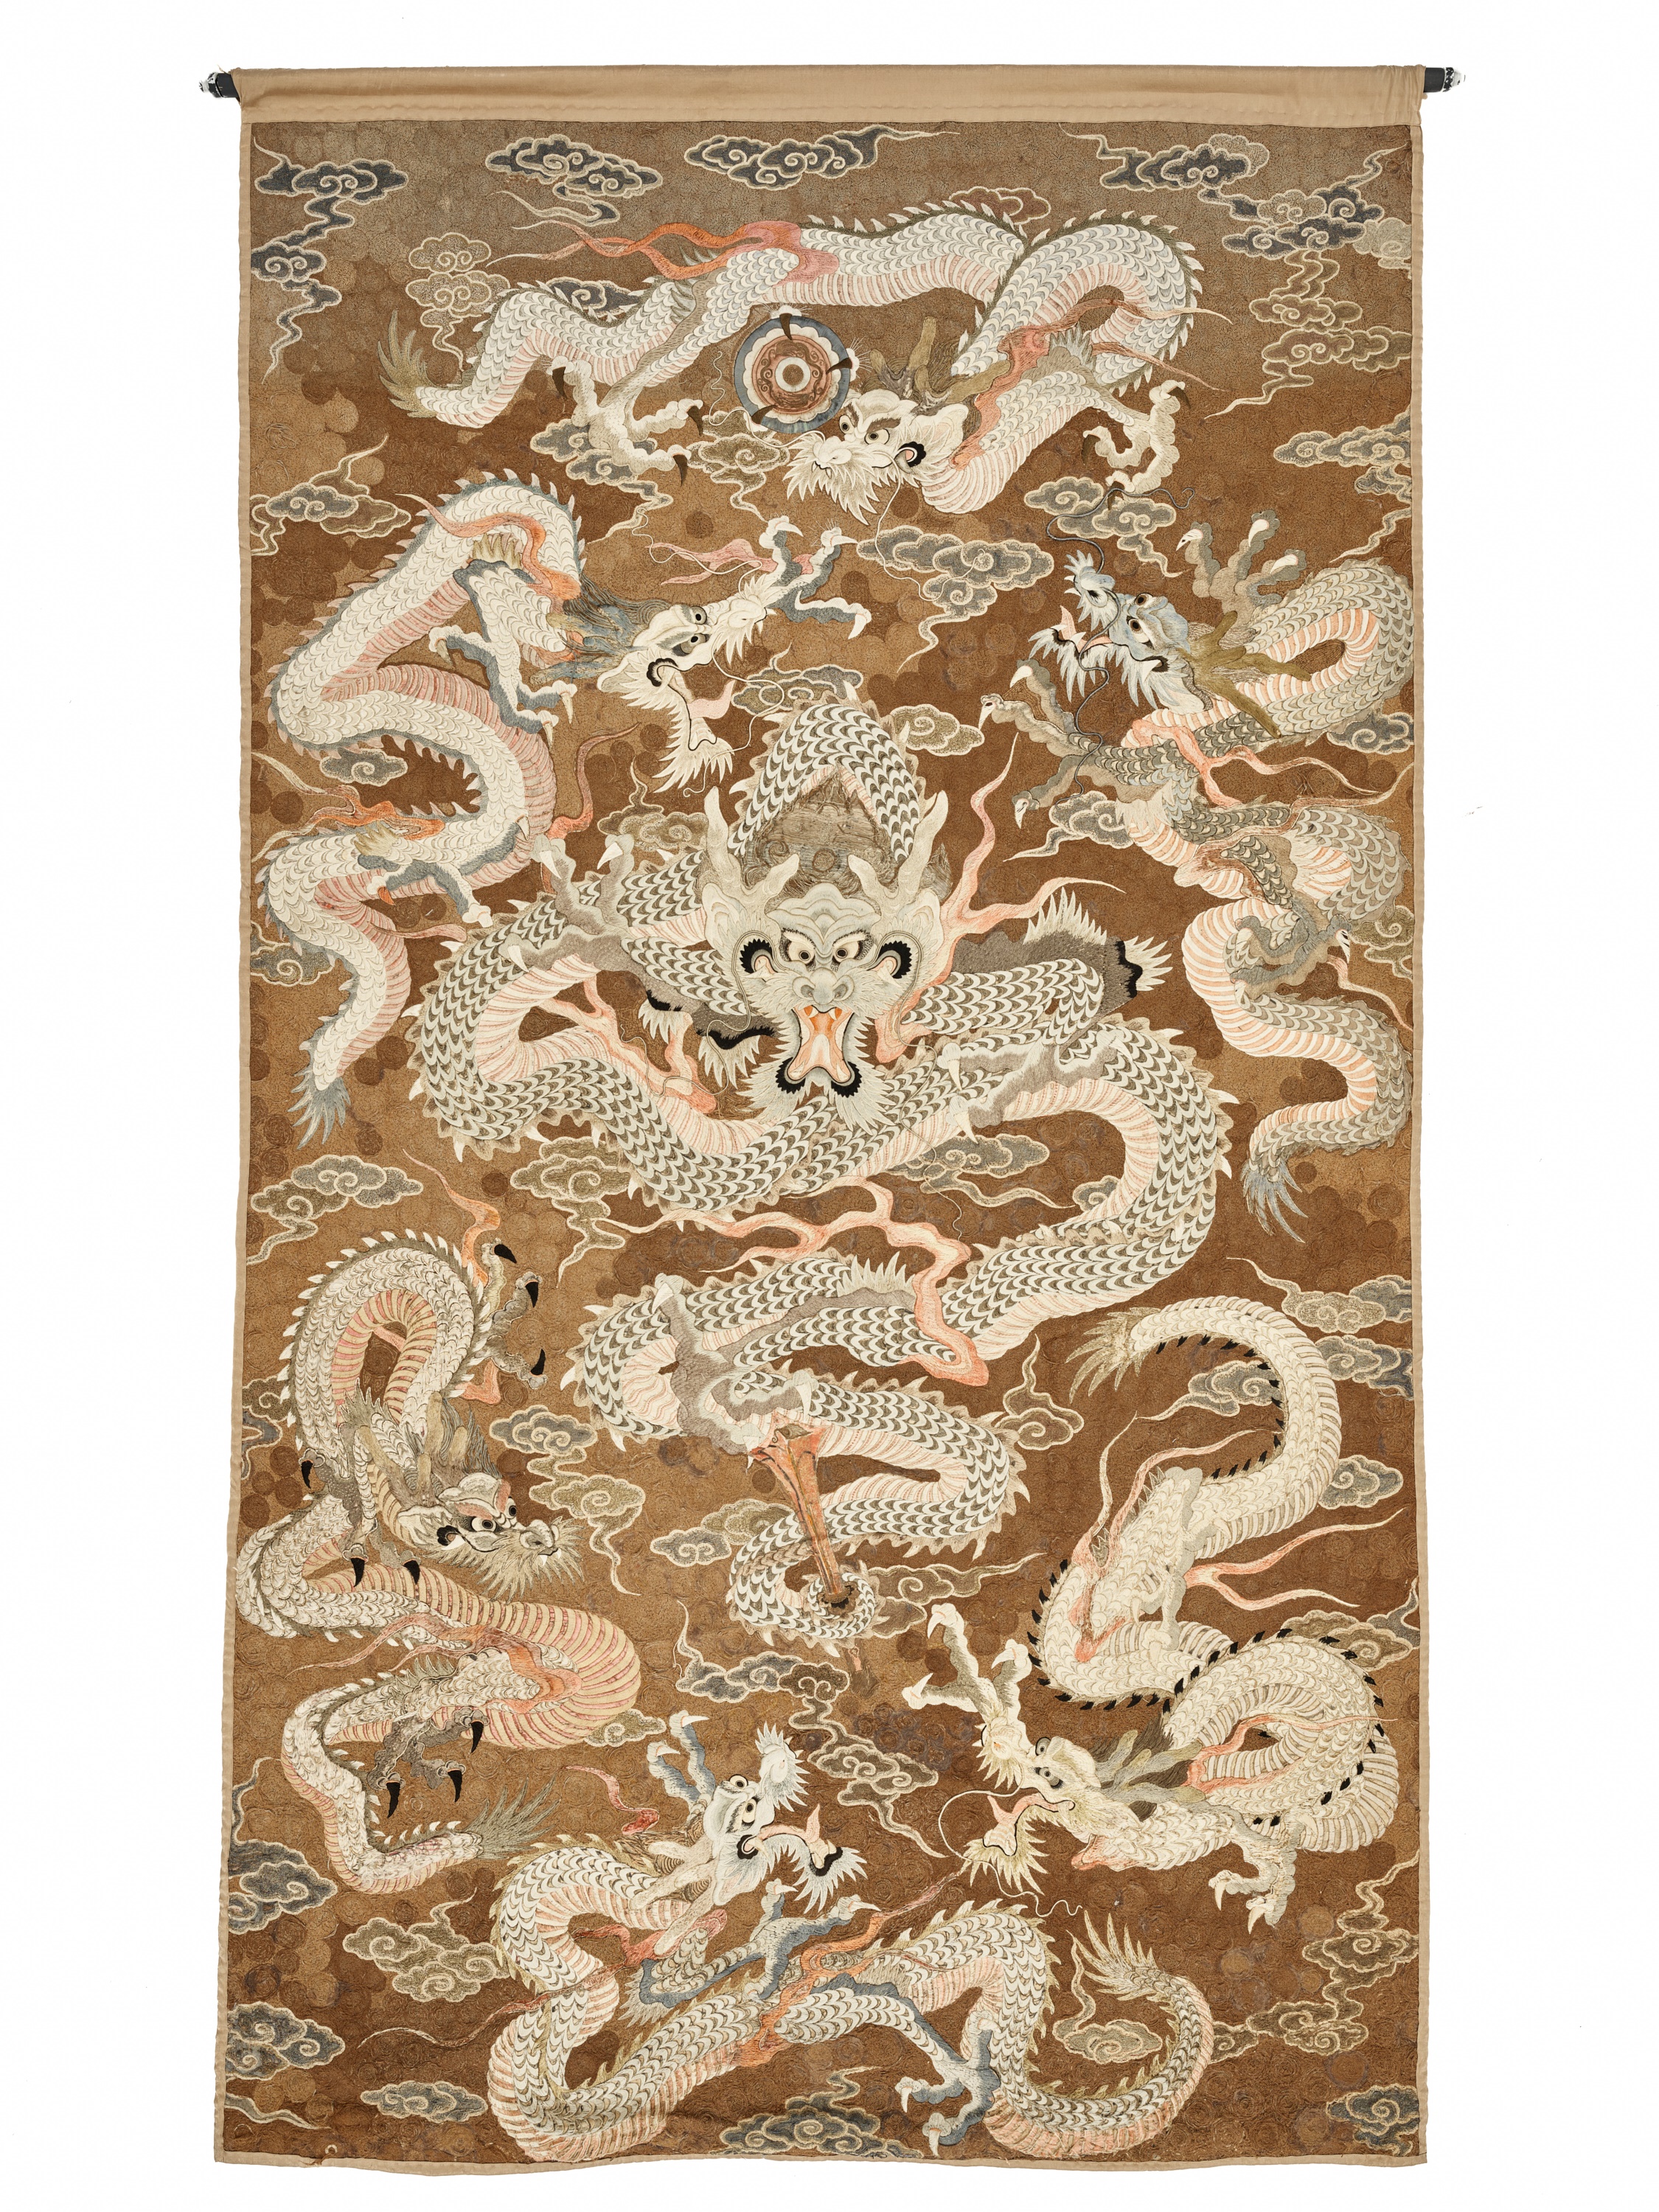 AN EXCEPTIONAL AND VERY LARGE SILK EMBROIDERED 'SEVEN DRAGON' WALL HANGING - Image 2 of 8